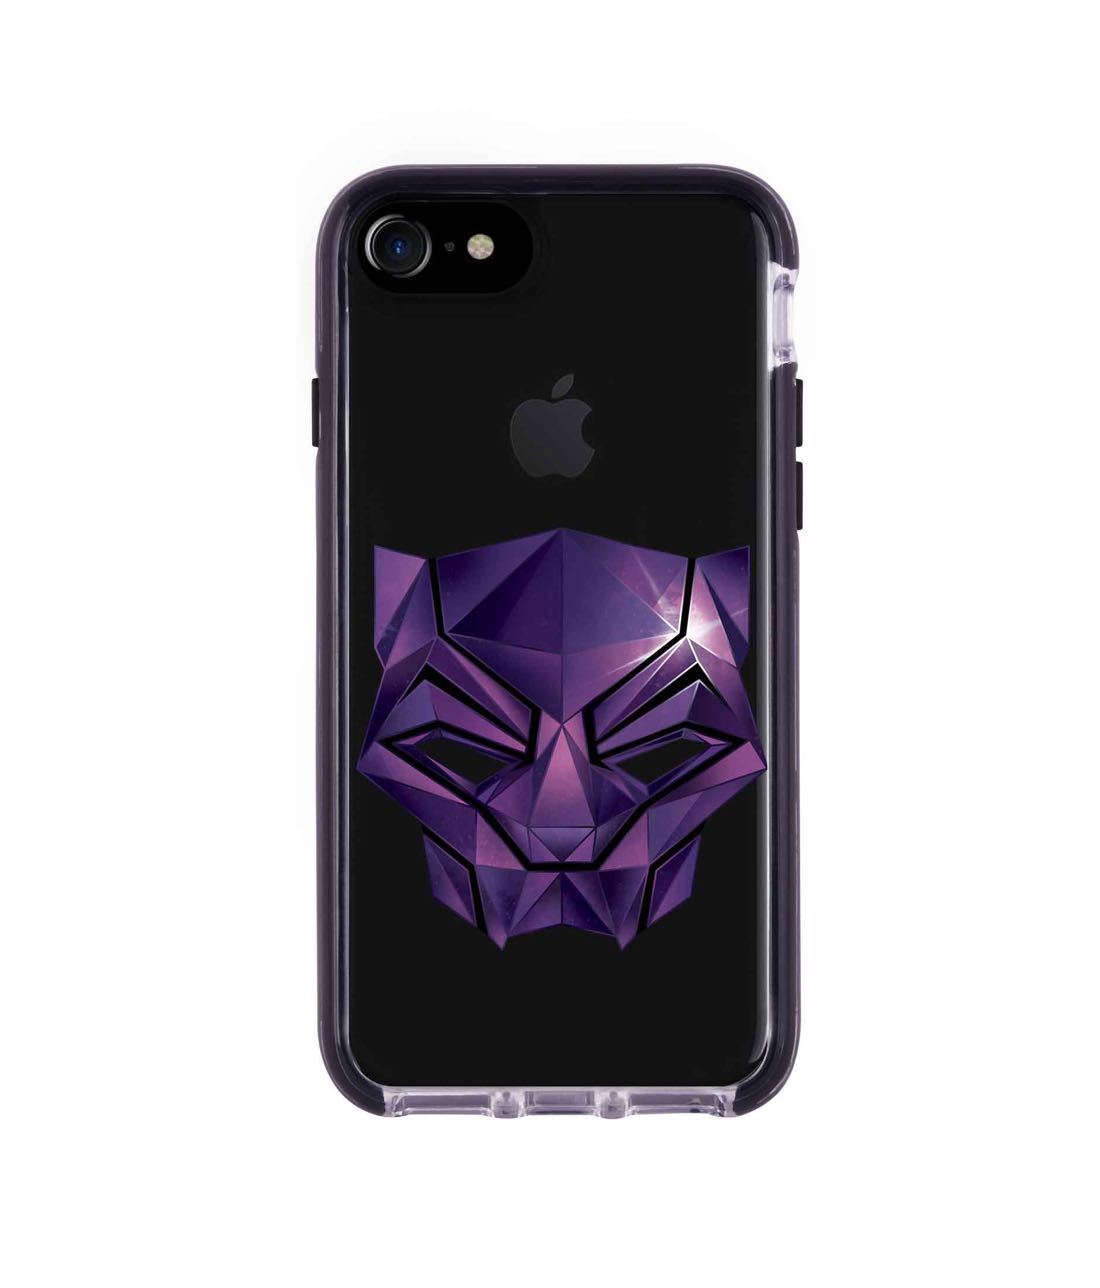 Black Panther Logo - Extreme Phone Case for iPhone 7